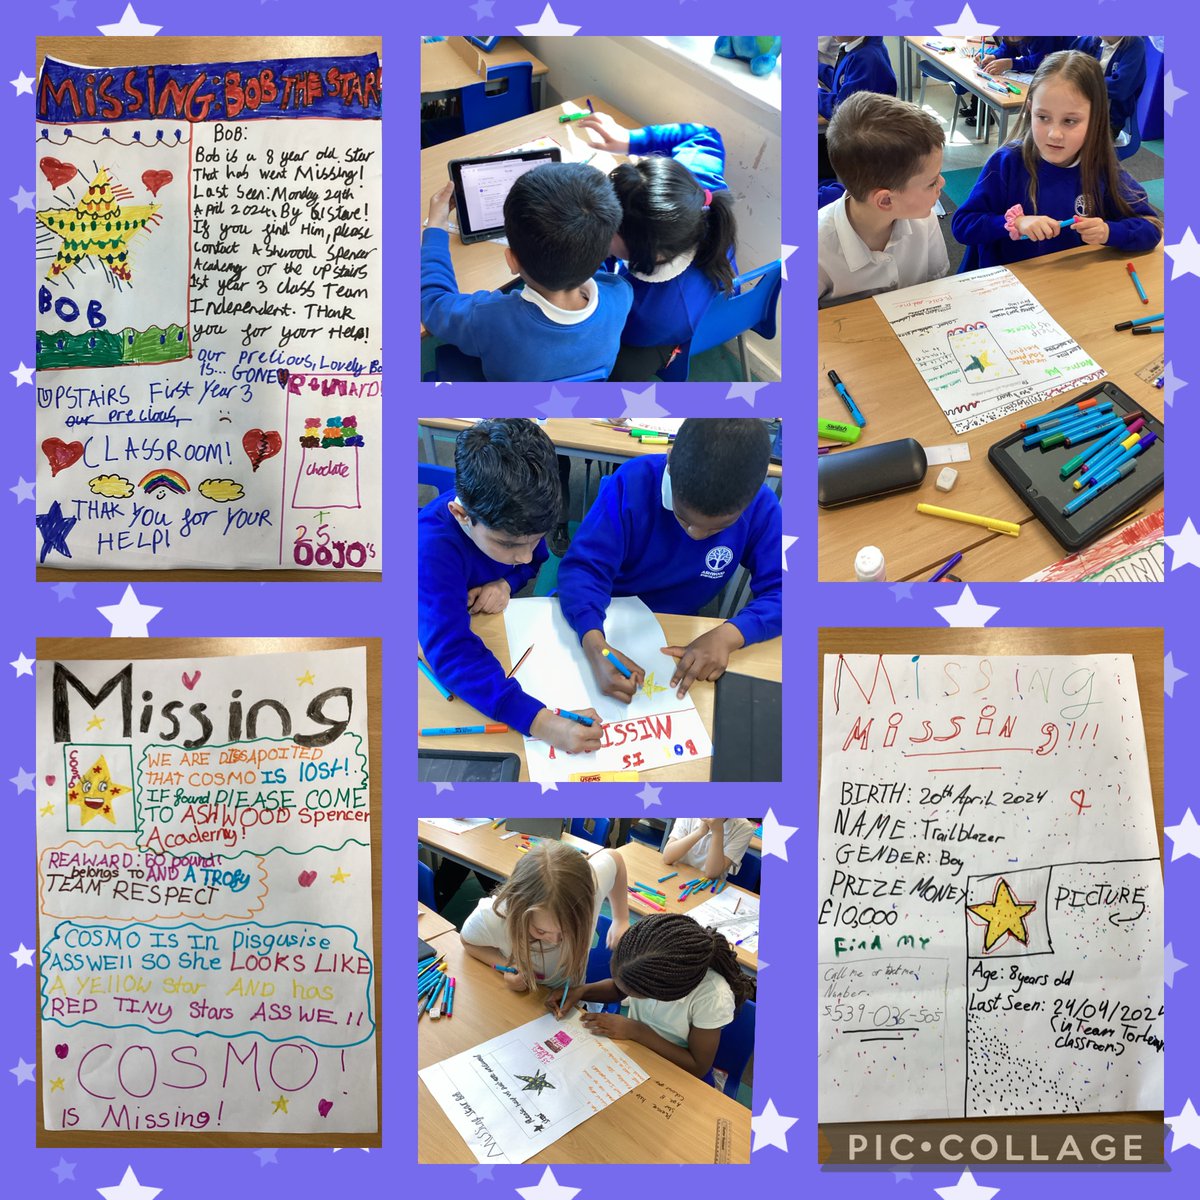 Year 3 have had a busy week. As well as being DREAMers in all aspects of our learning, we discovered that our special stars had disappeared! We got to work immediately using the skills we have learnt in English and computing to create posters to help find them. #TEAM @satrust_